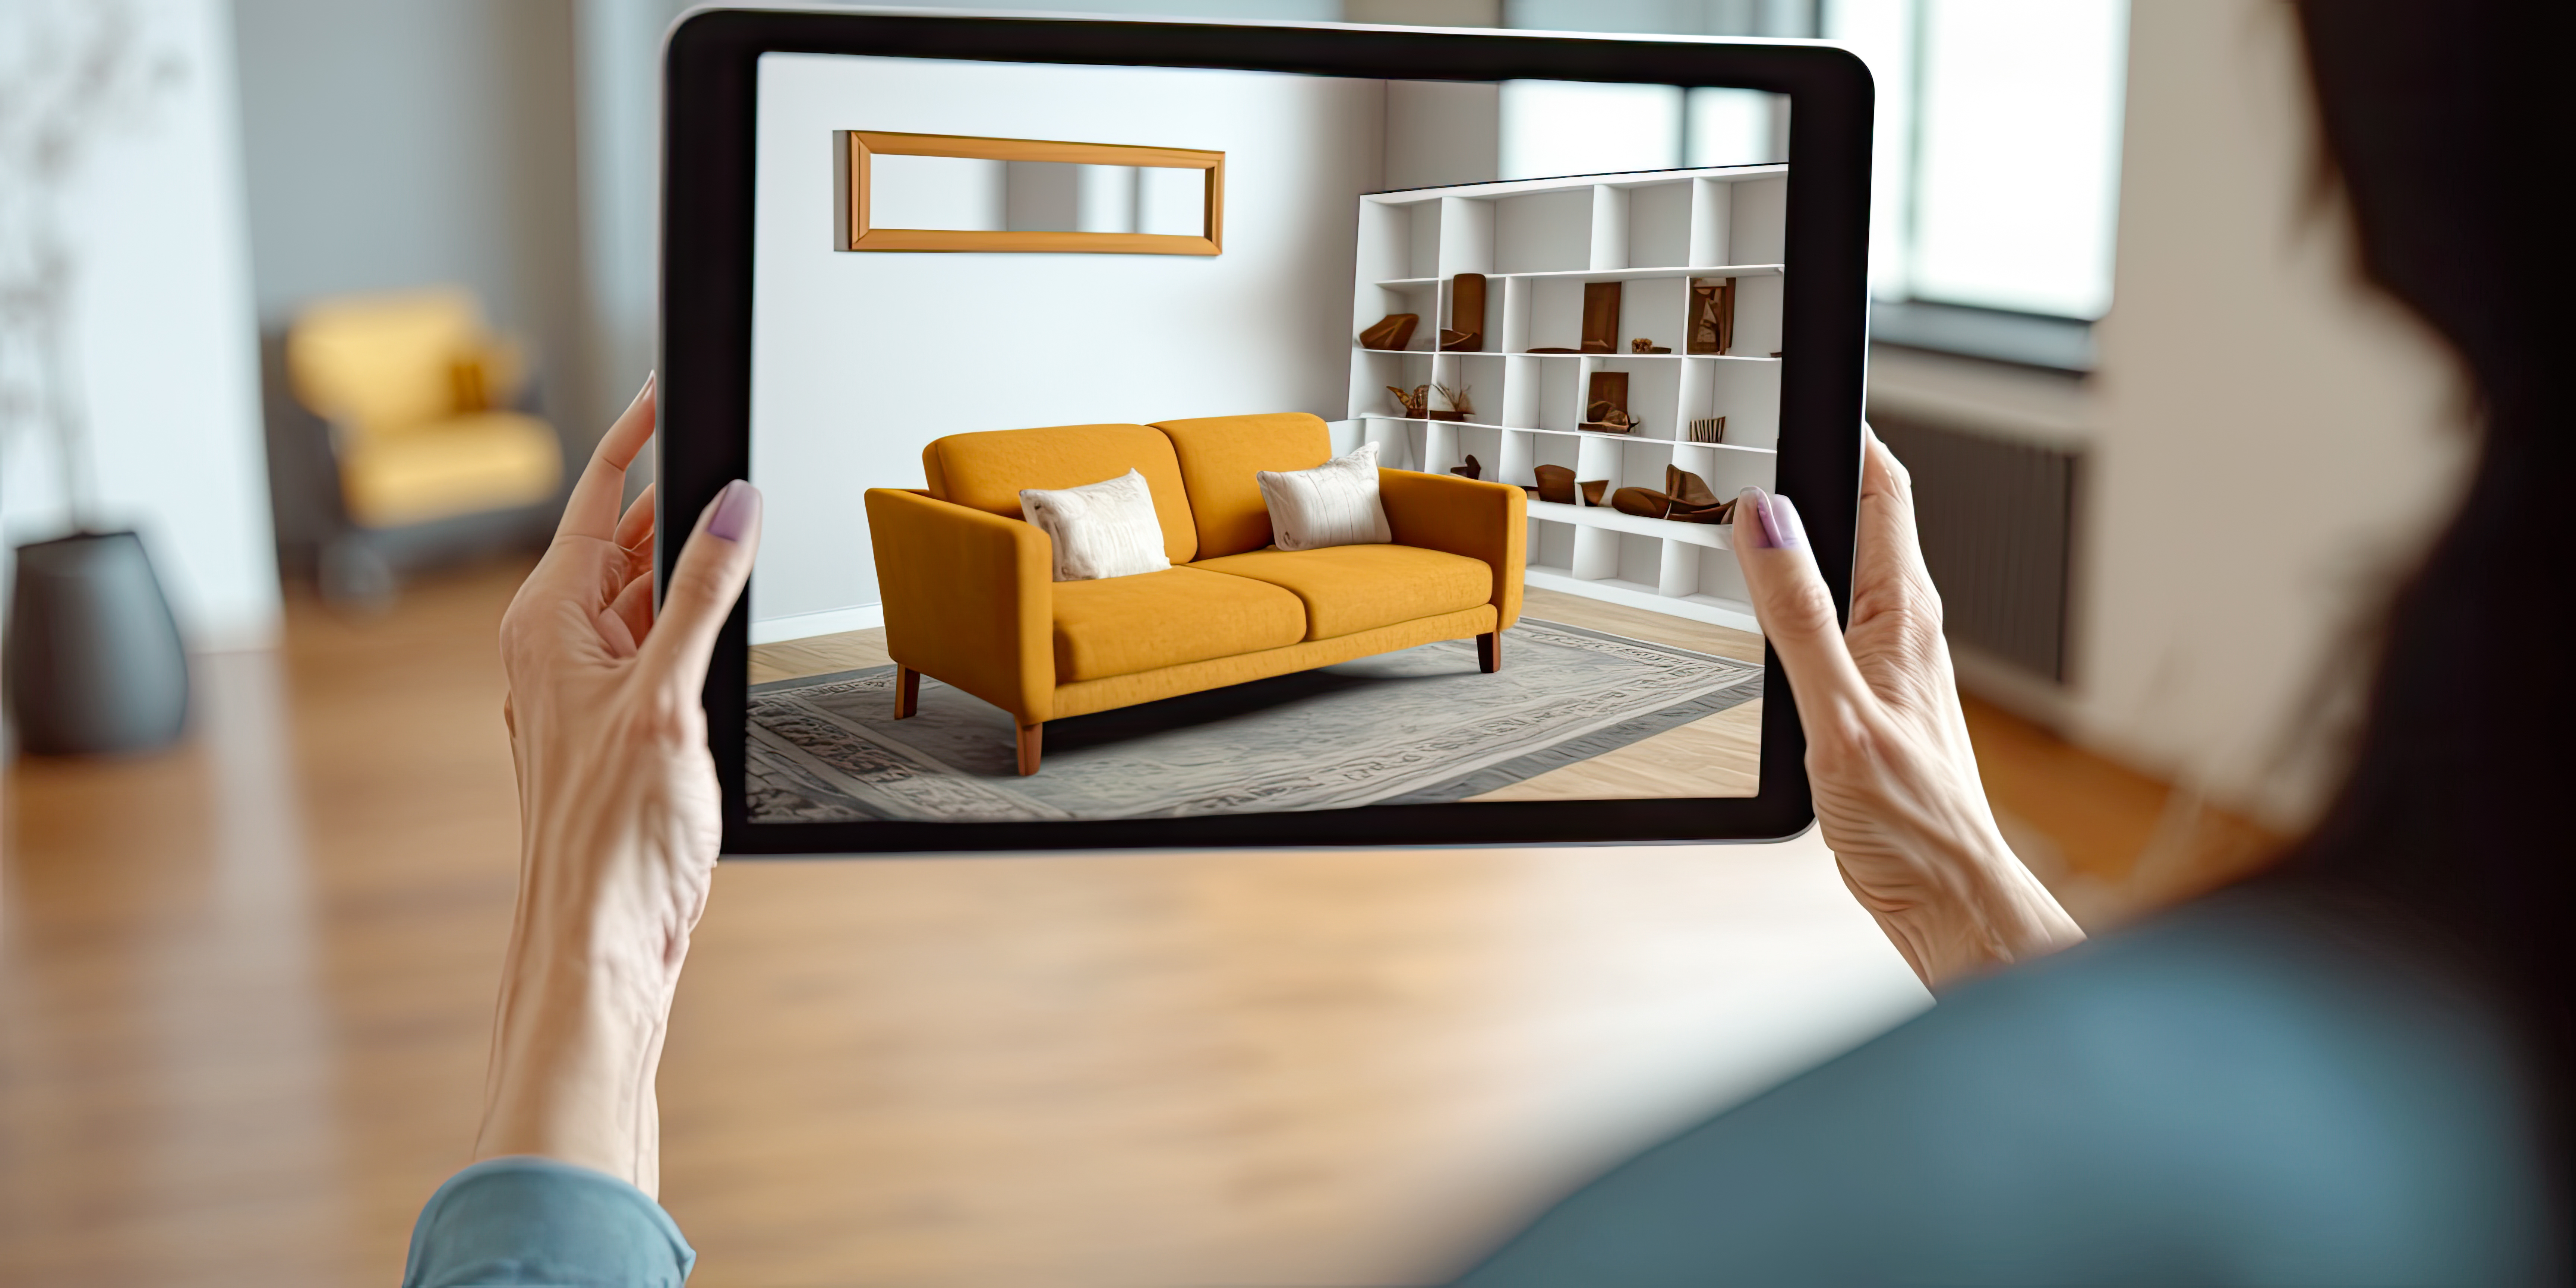 A user using augmented reality to visualise how a sofa looks and fits in their home.